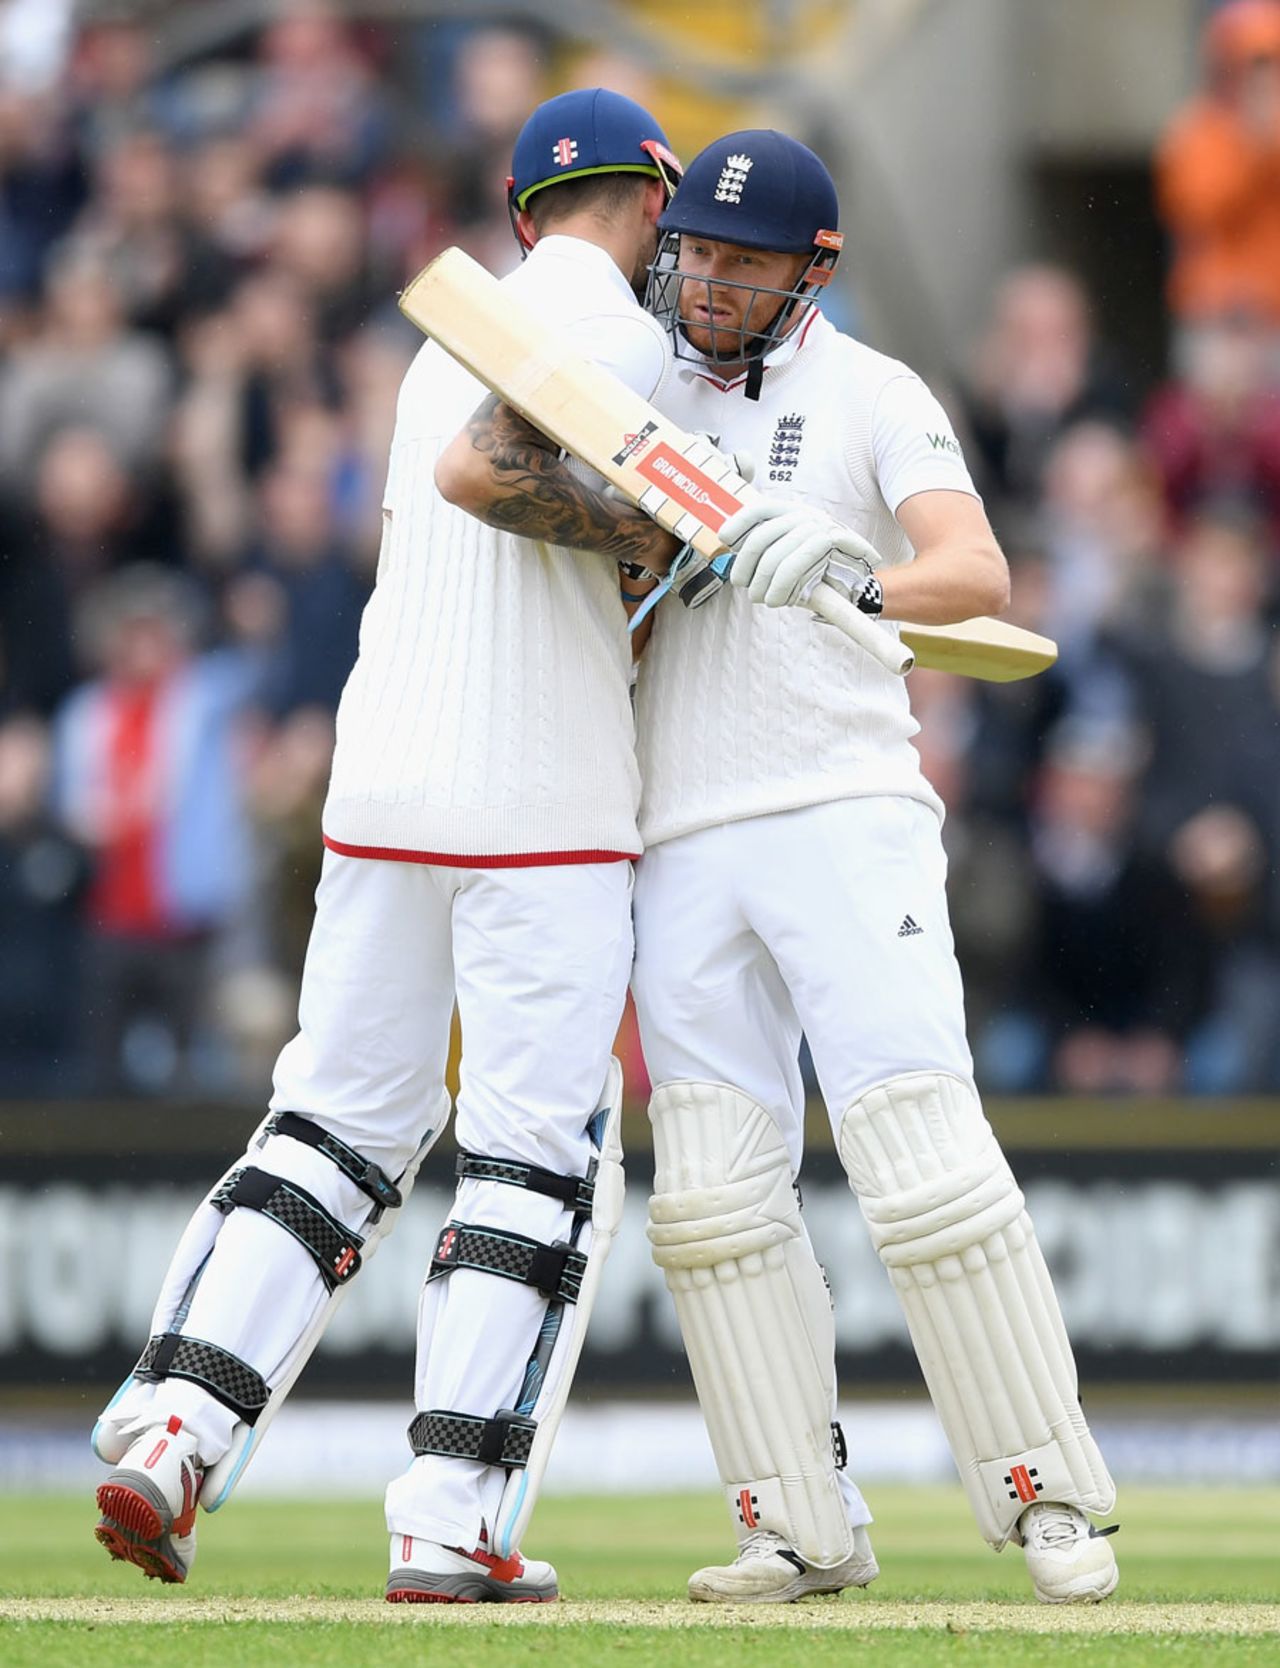 The partnership between Alex Hales and Jonny Bairstow dug their side out of trouble, England v Sri Lanka, 1st Test, Headingley, 1st day, May 19, 2016